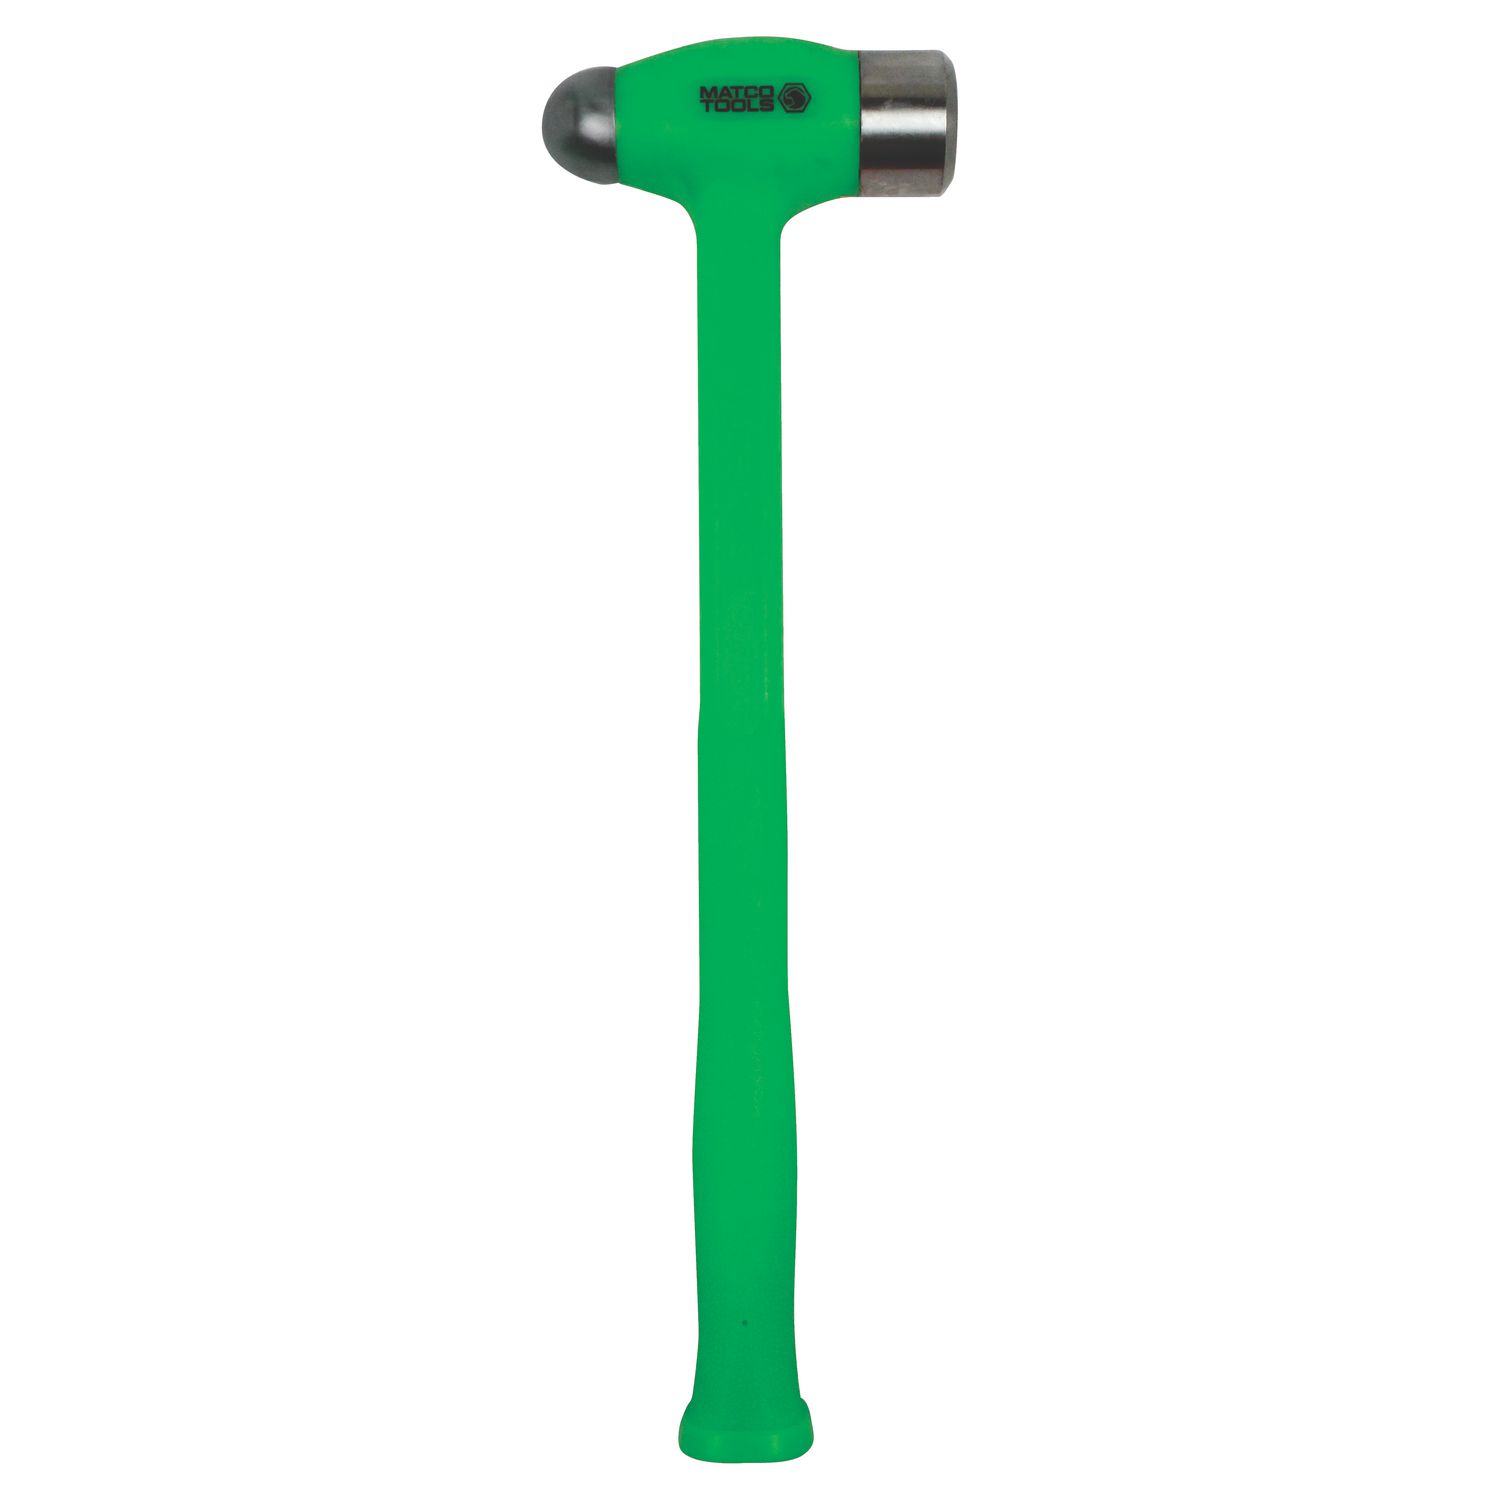 Ampco Safety Tools Ball Peen Hammer 1lb:Facility Safety and Maintenance